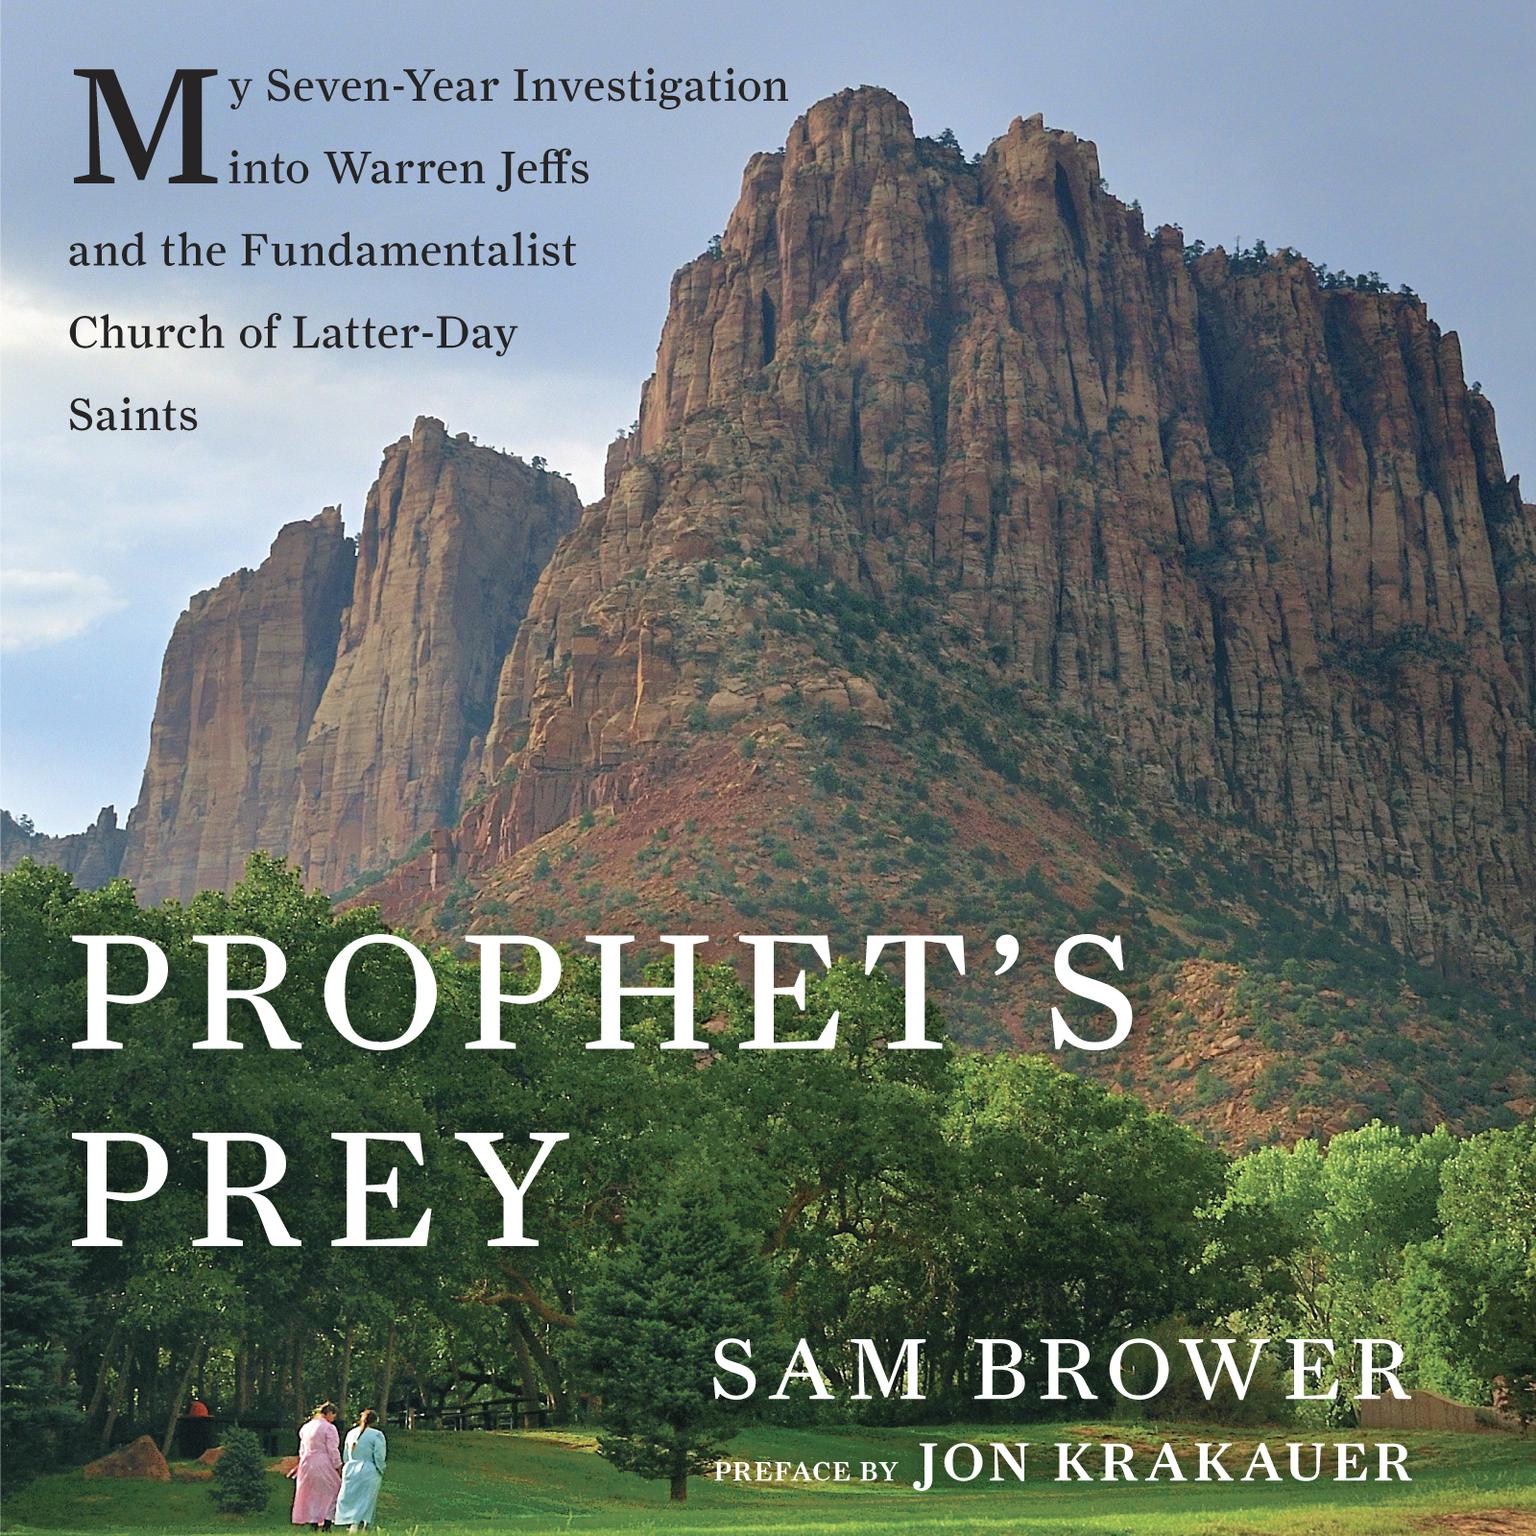 Prophets Prey: My Seven-Year Investigation into Warren Jeffs and the Fundamentalist Church of Latter Day Saints Audiobook, by Sam Brower